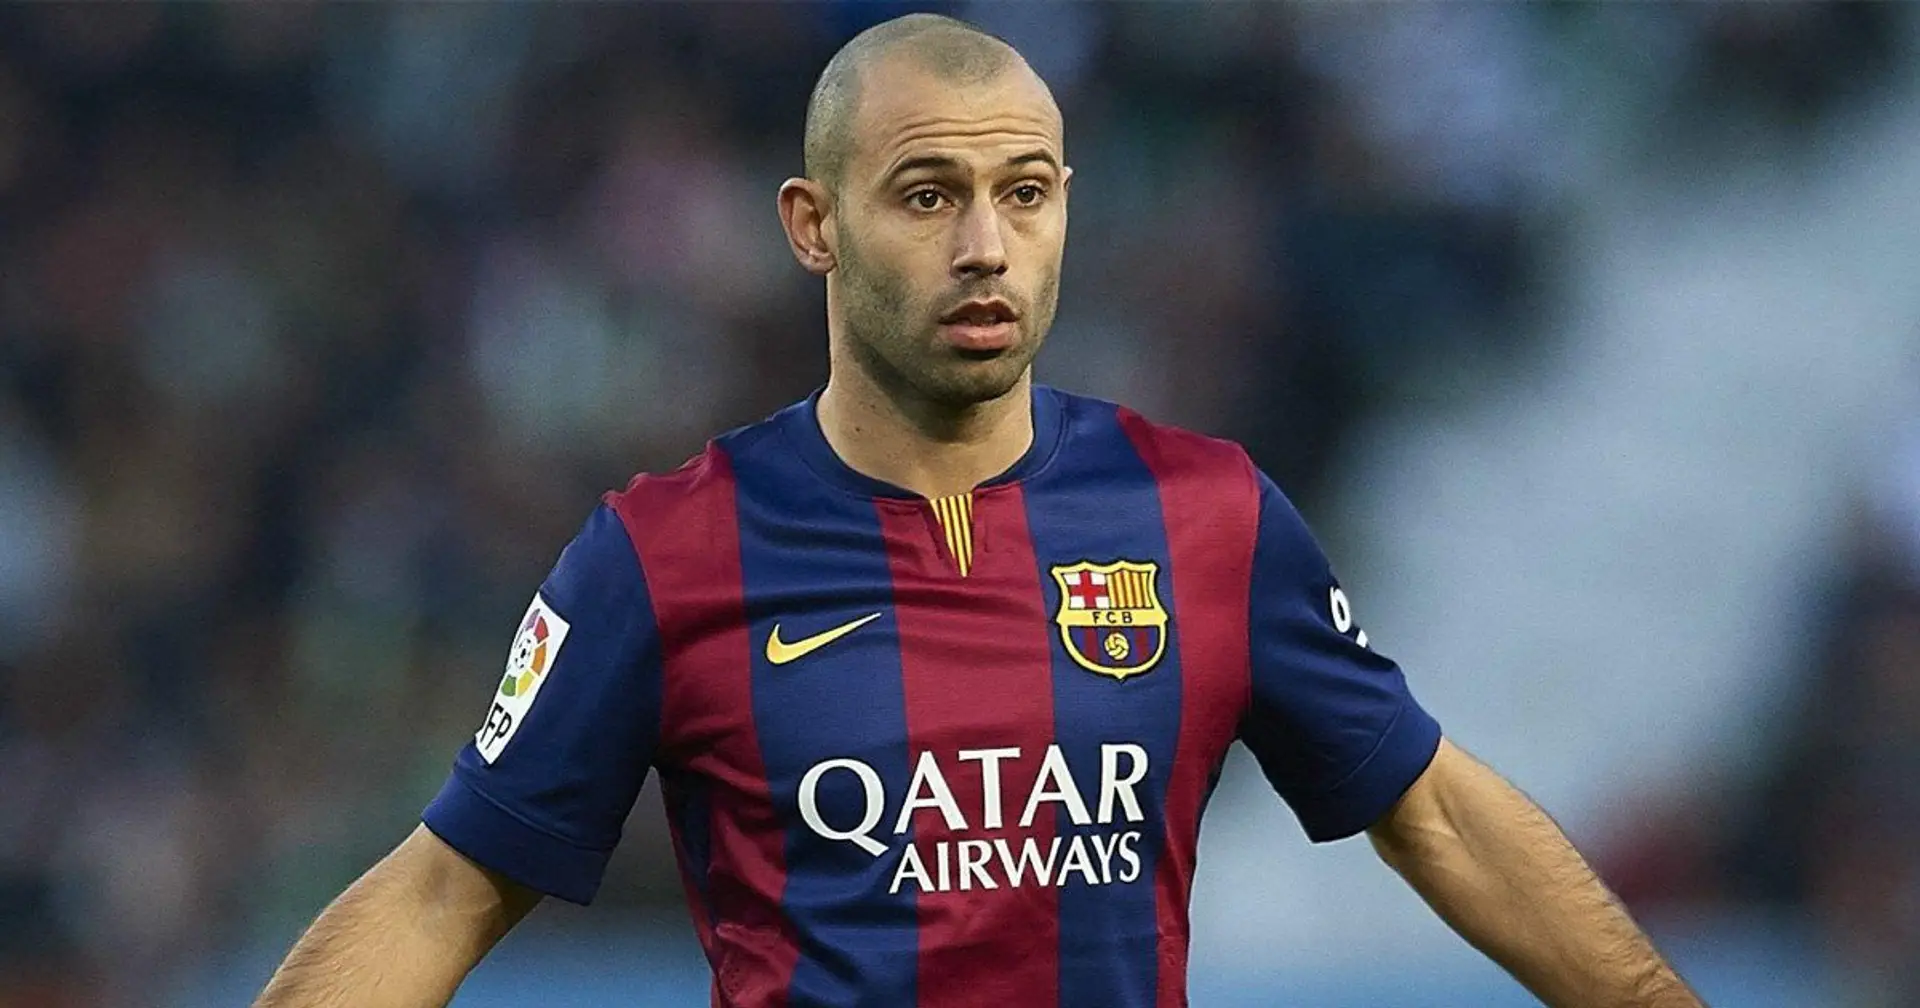 4 reasons why Mascherano decided to retire amid ongoing season